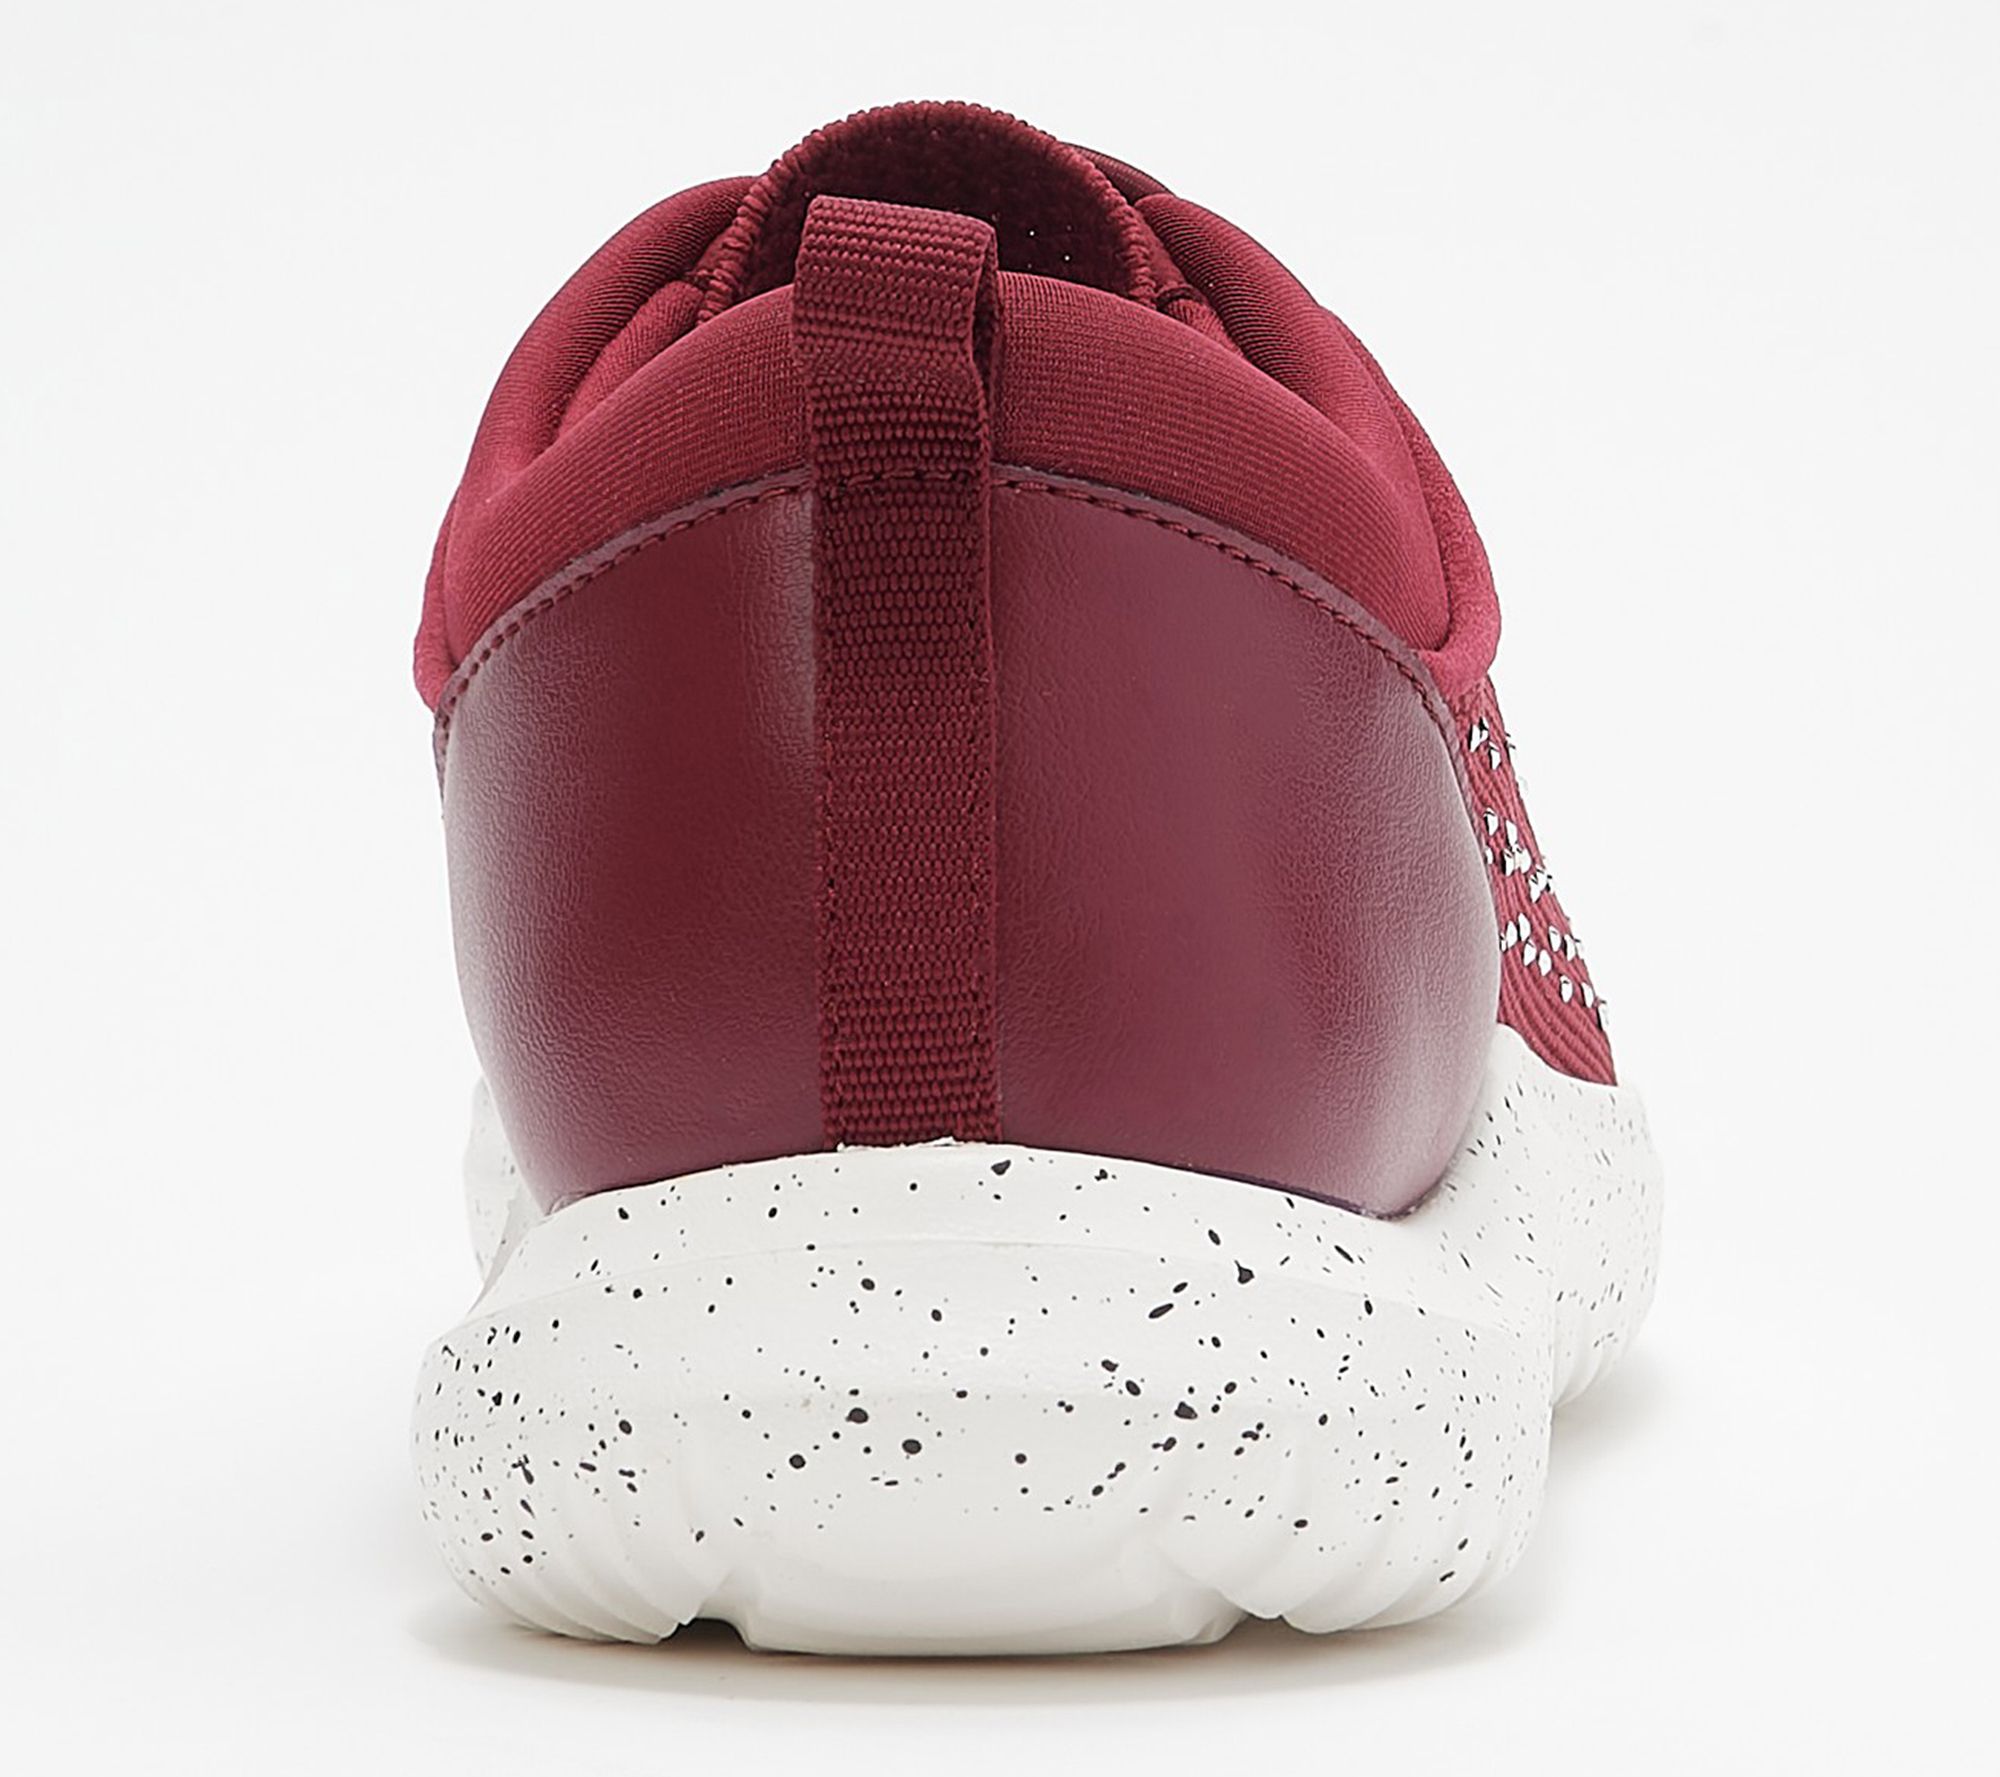 Clarks Cloudsteppers Embellished Bungee Sneakers - Nova Step - QVC.com